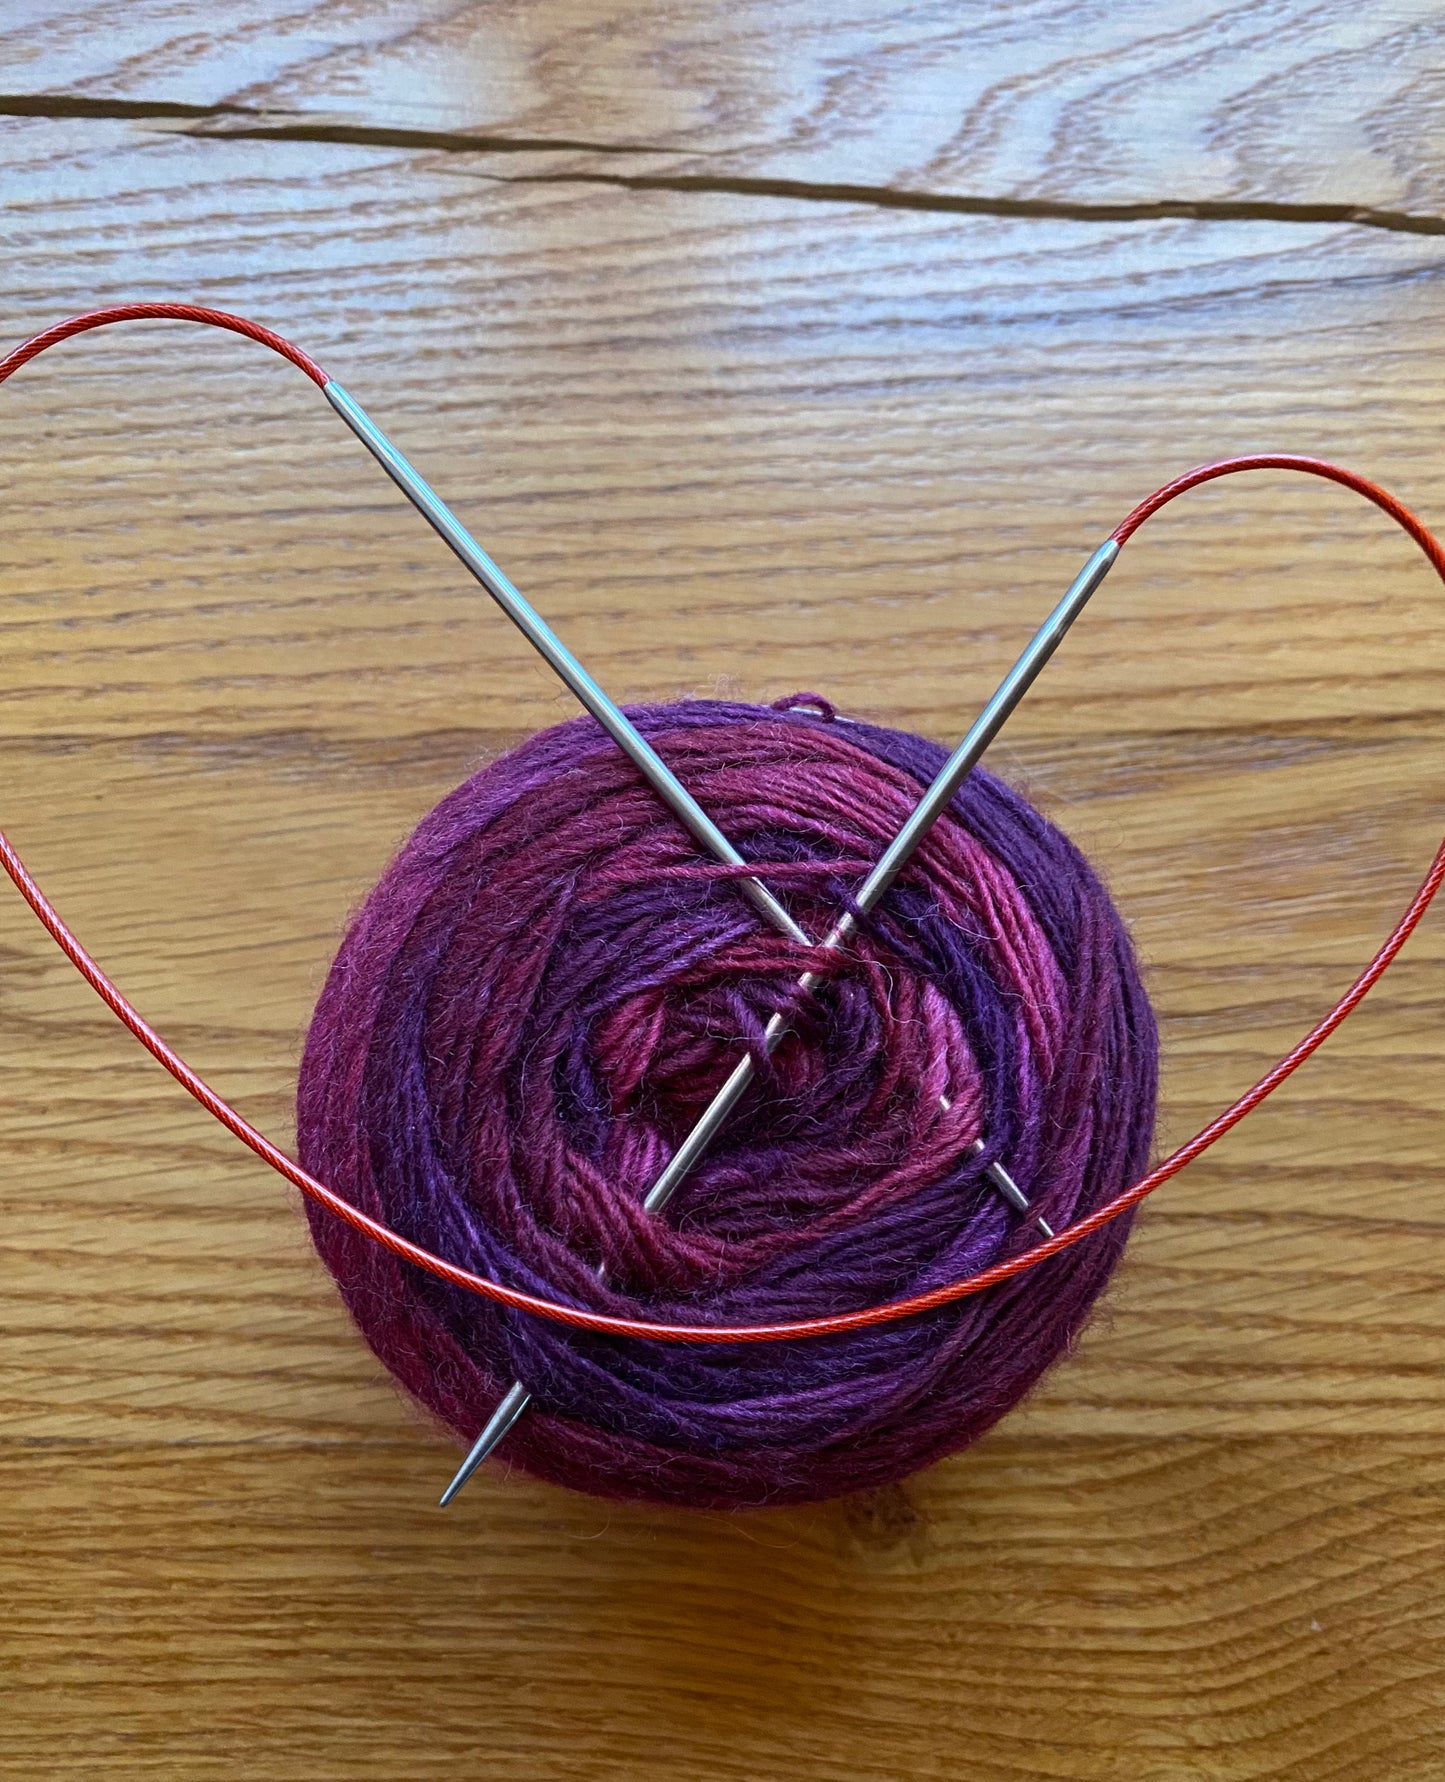 Red Lace Circular Needles Small